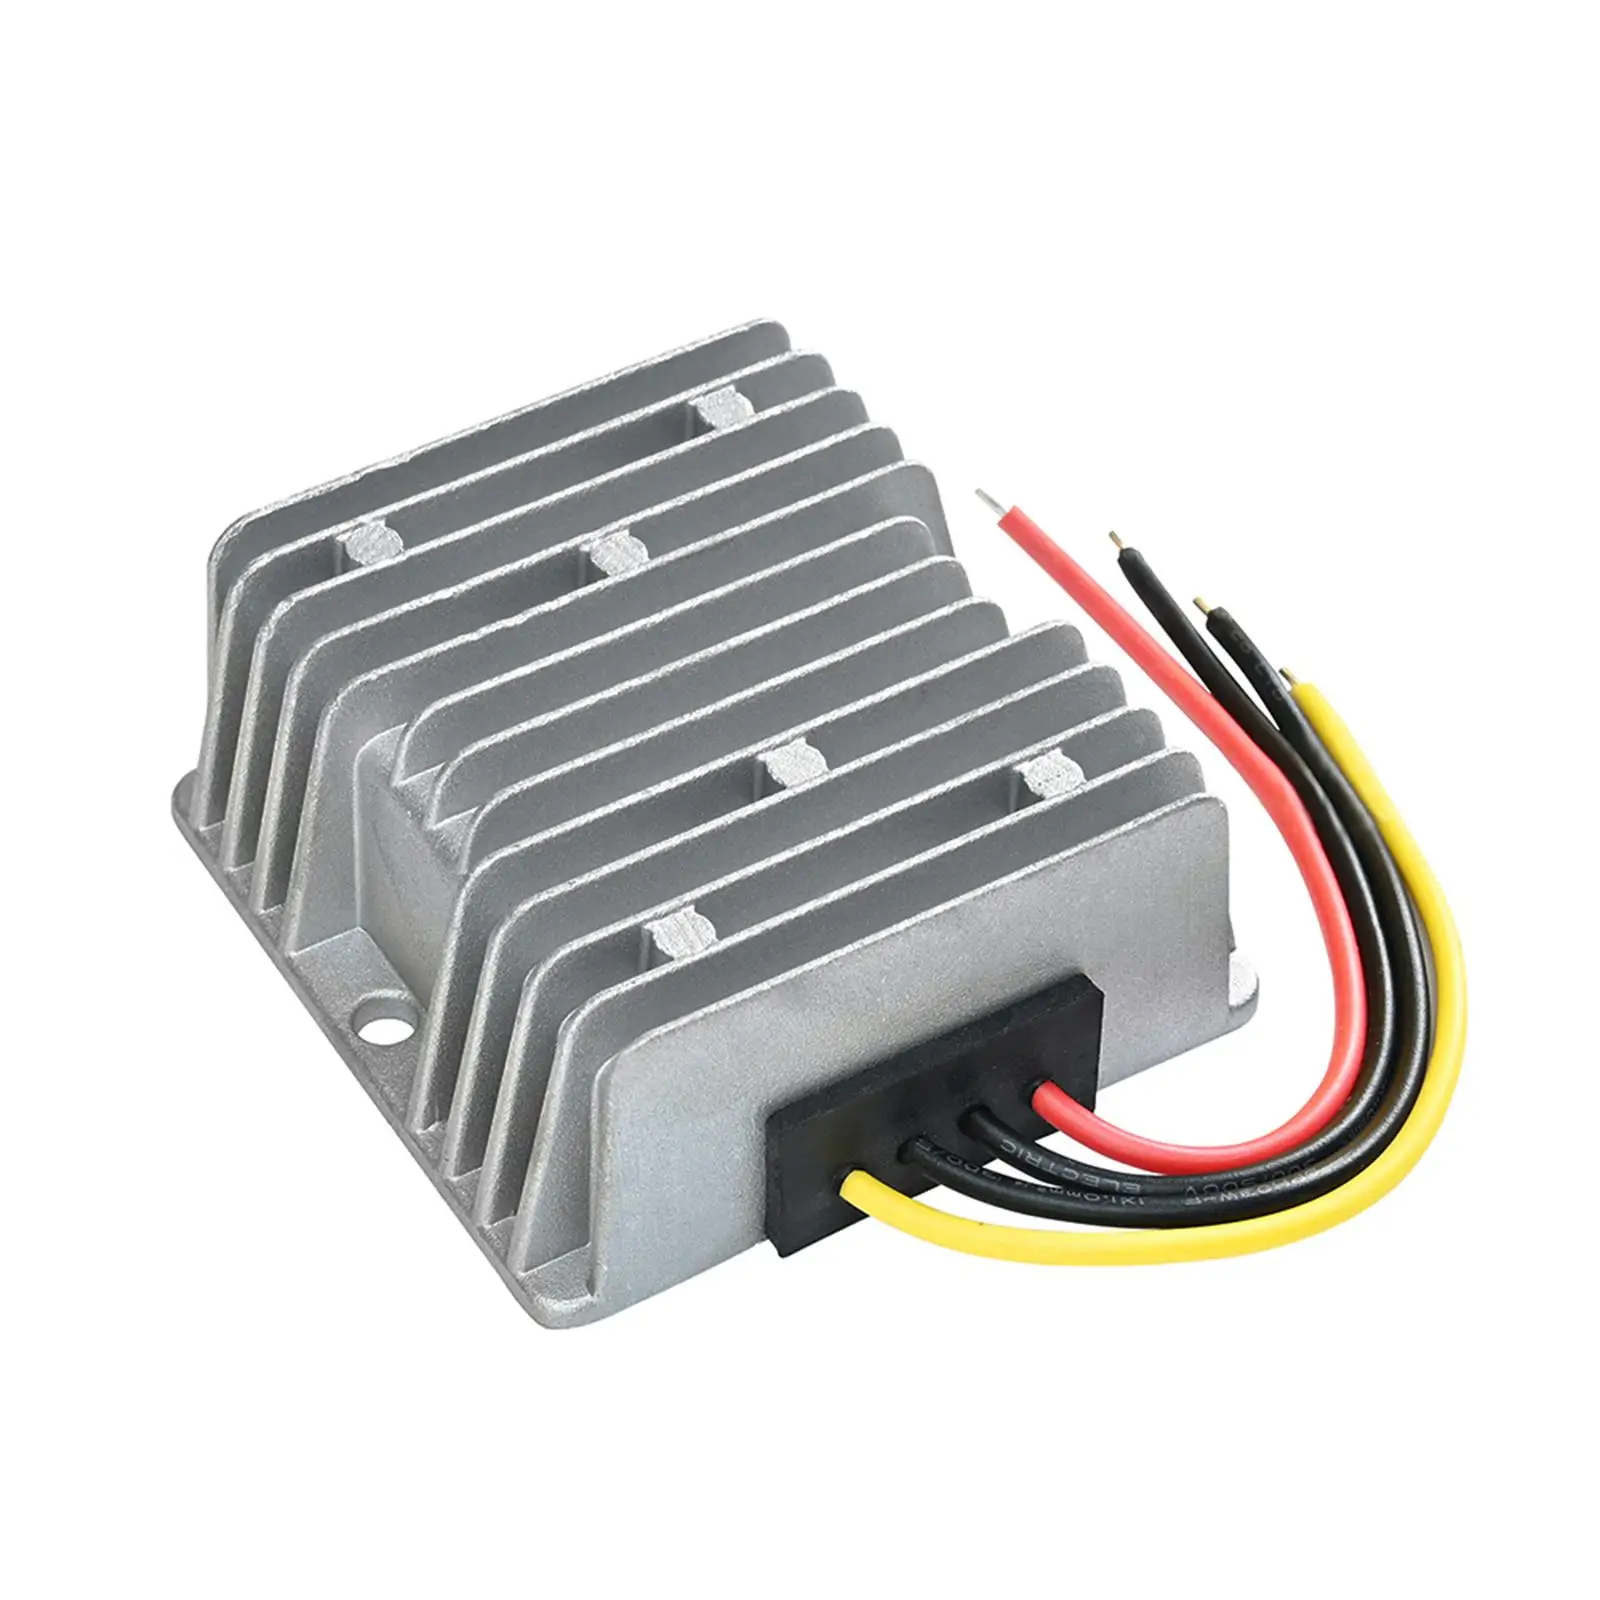 Converter Heat Dissipation Replacements Module Over Current Protection Over Temperature Protection Convenient for Audio Car